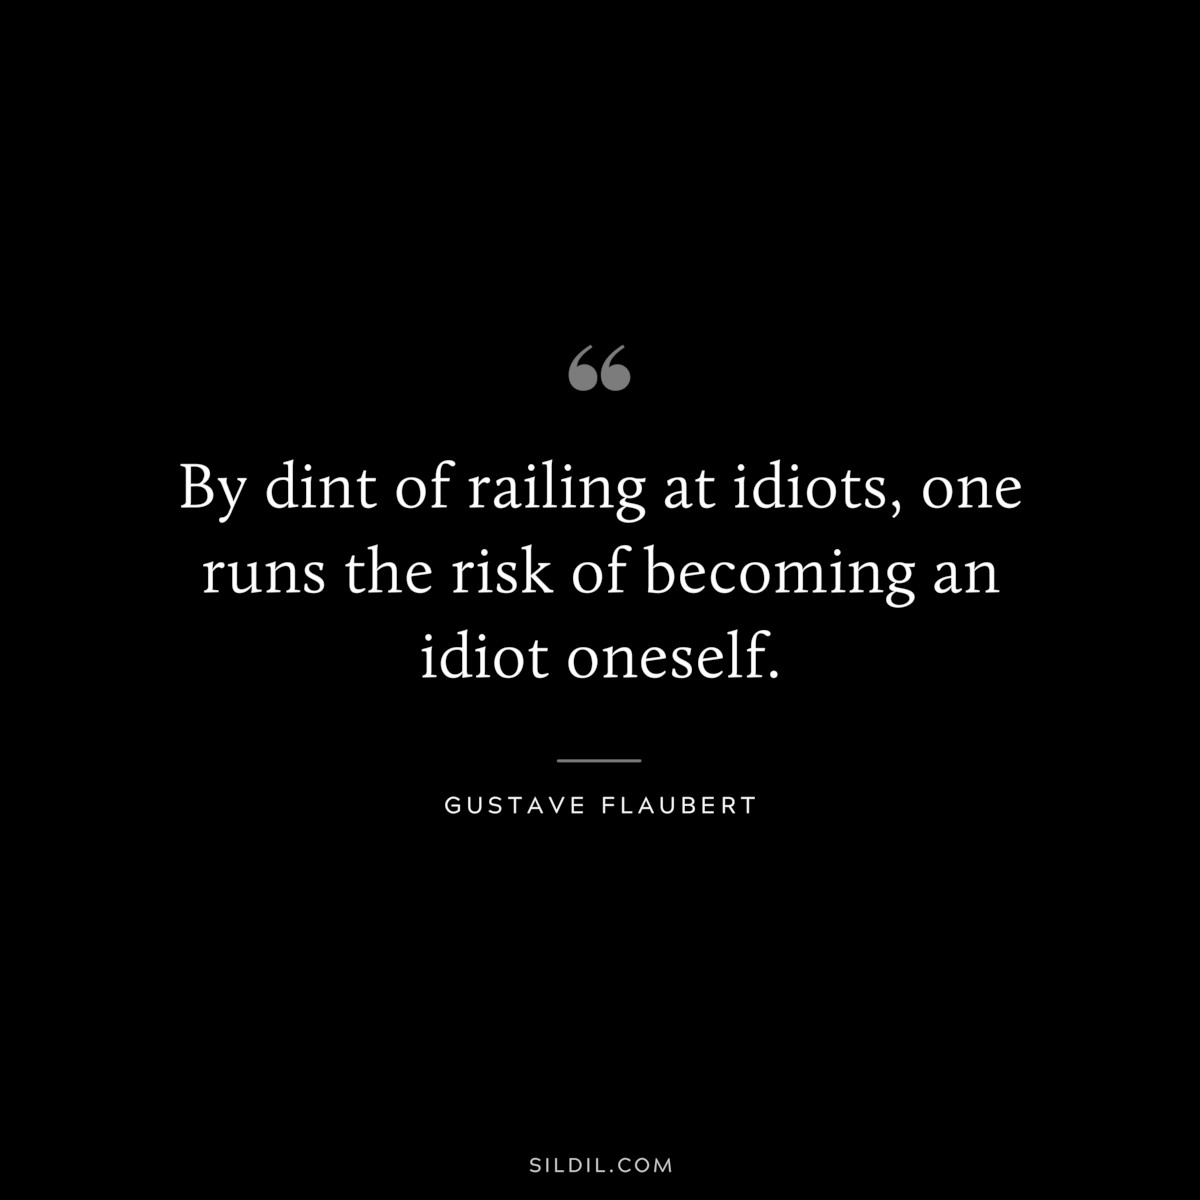 By dint of railing at idiots, one runs the risk of becoming an idiot oneself. ― Gustave Flaubert